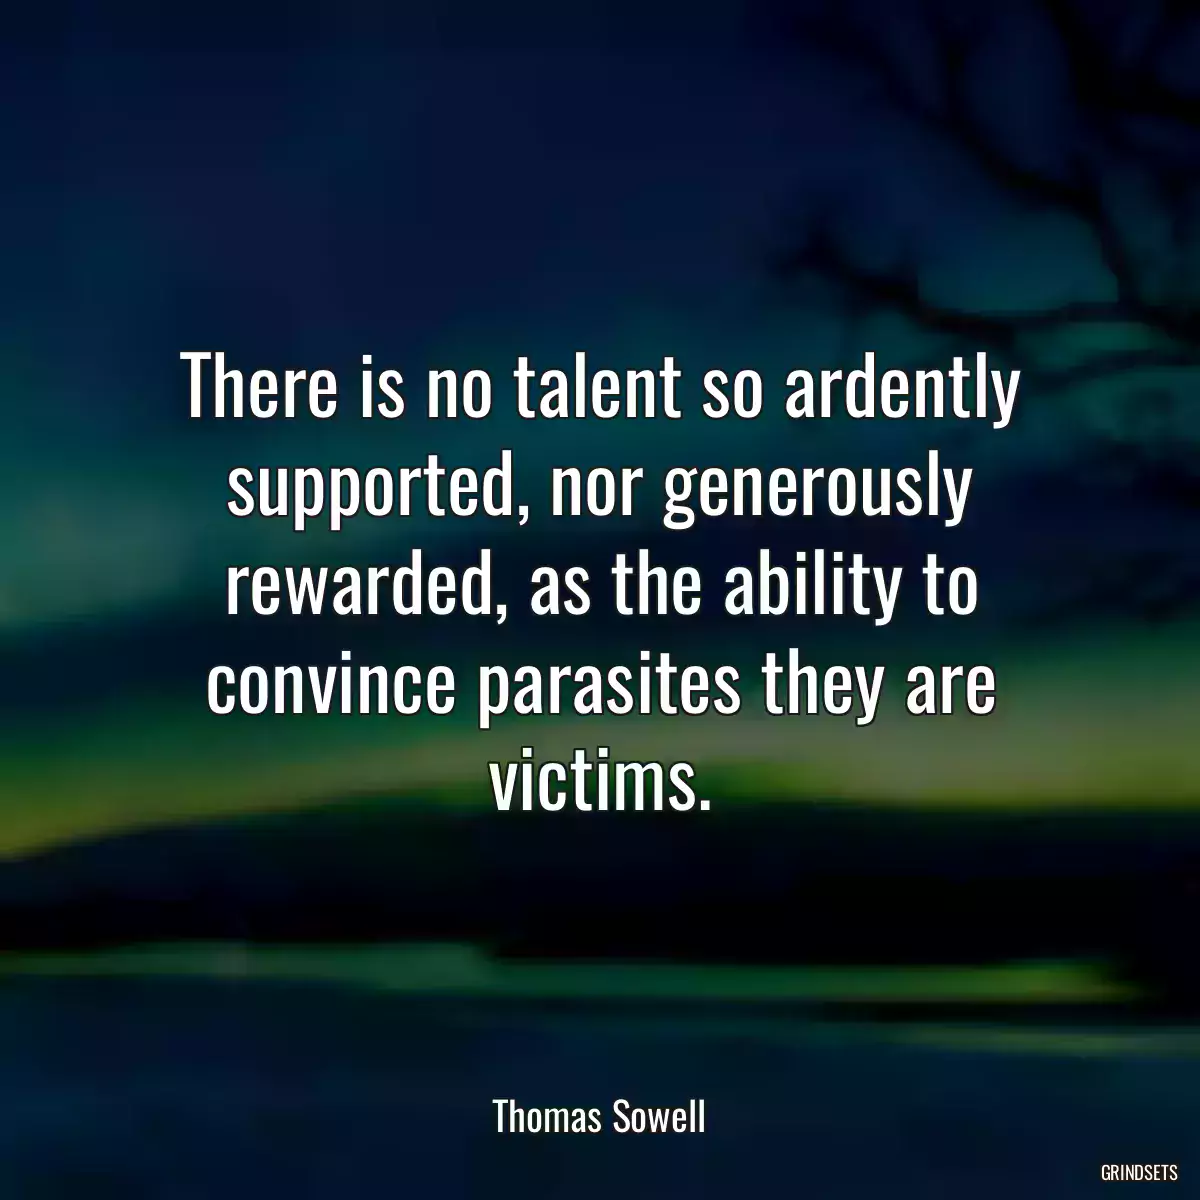 There is no talent so ardently supported, nor generously rewarded, as the ability to convince parasites they are victims.